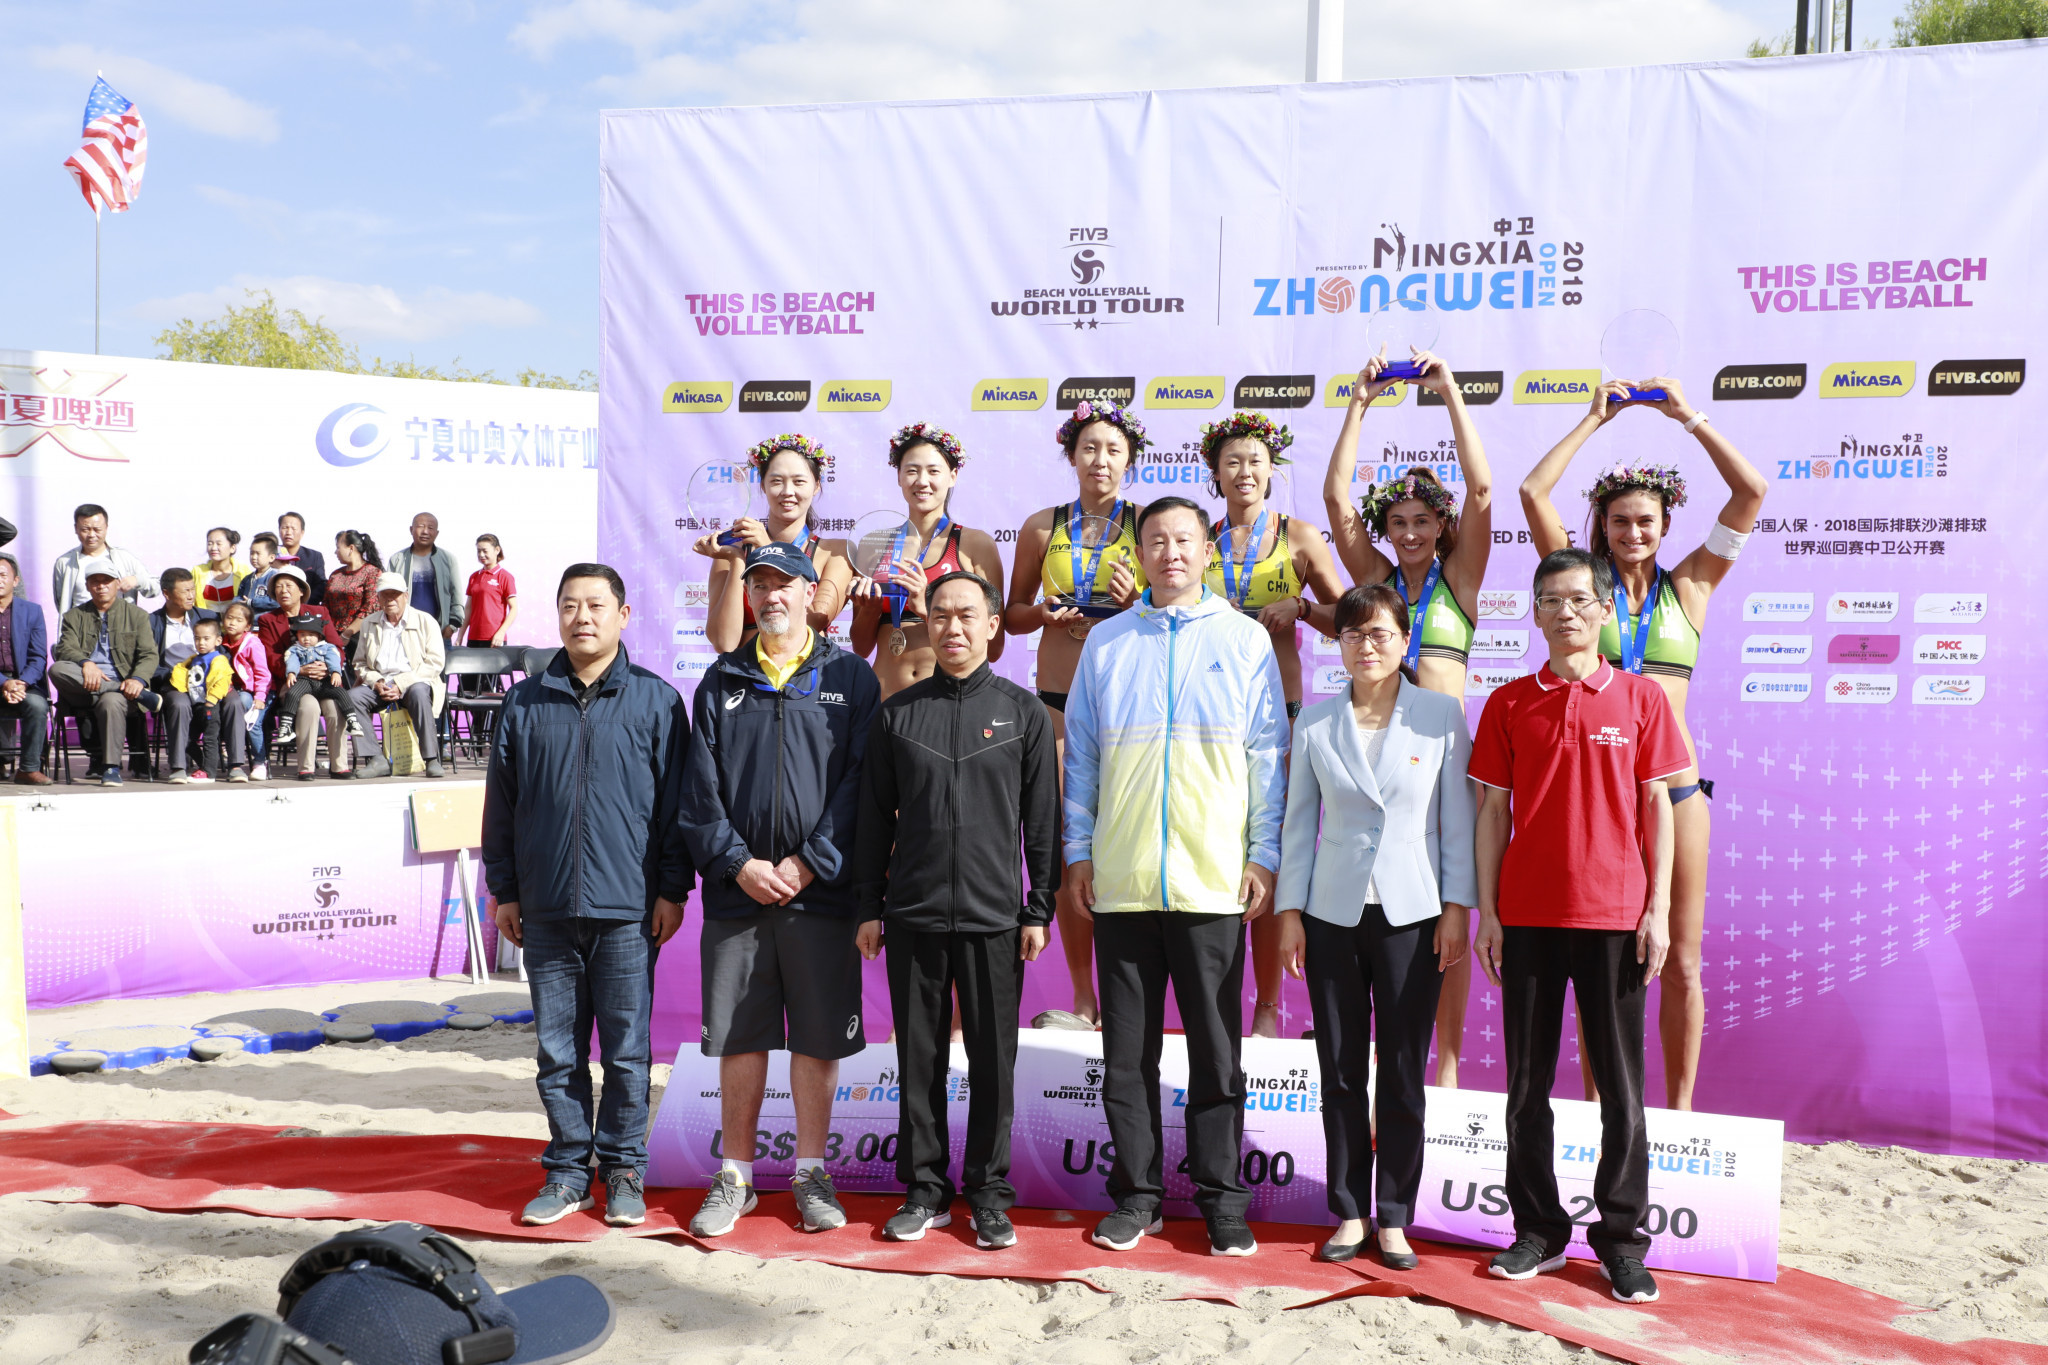 Medallists at the Zhongwei Open earlier this month - China will also host the next FIVB Beach Volleyball World Tour event in Qinzhou starting from tomorrow ©FIVB